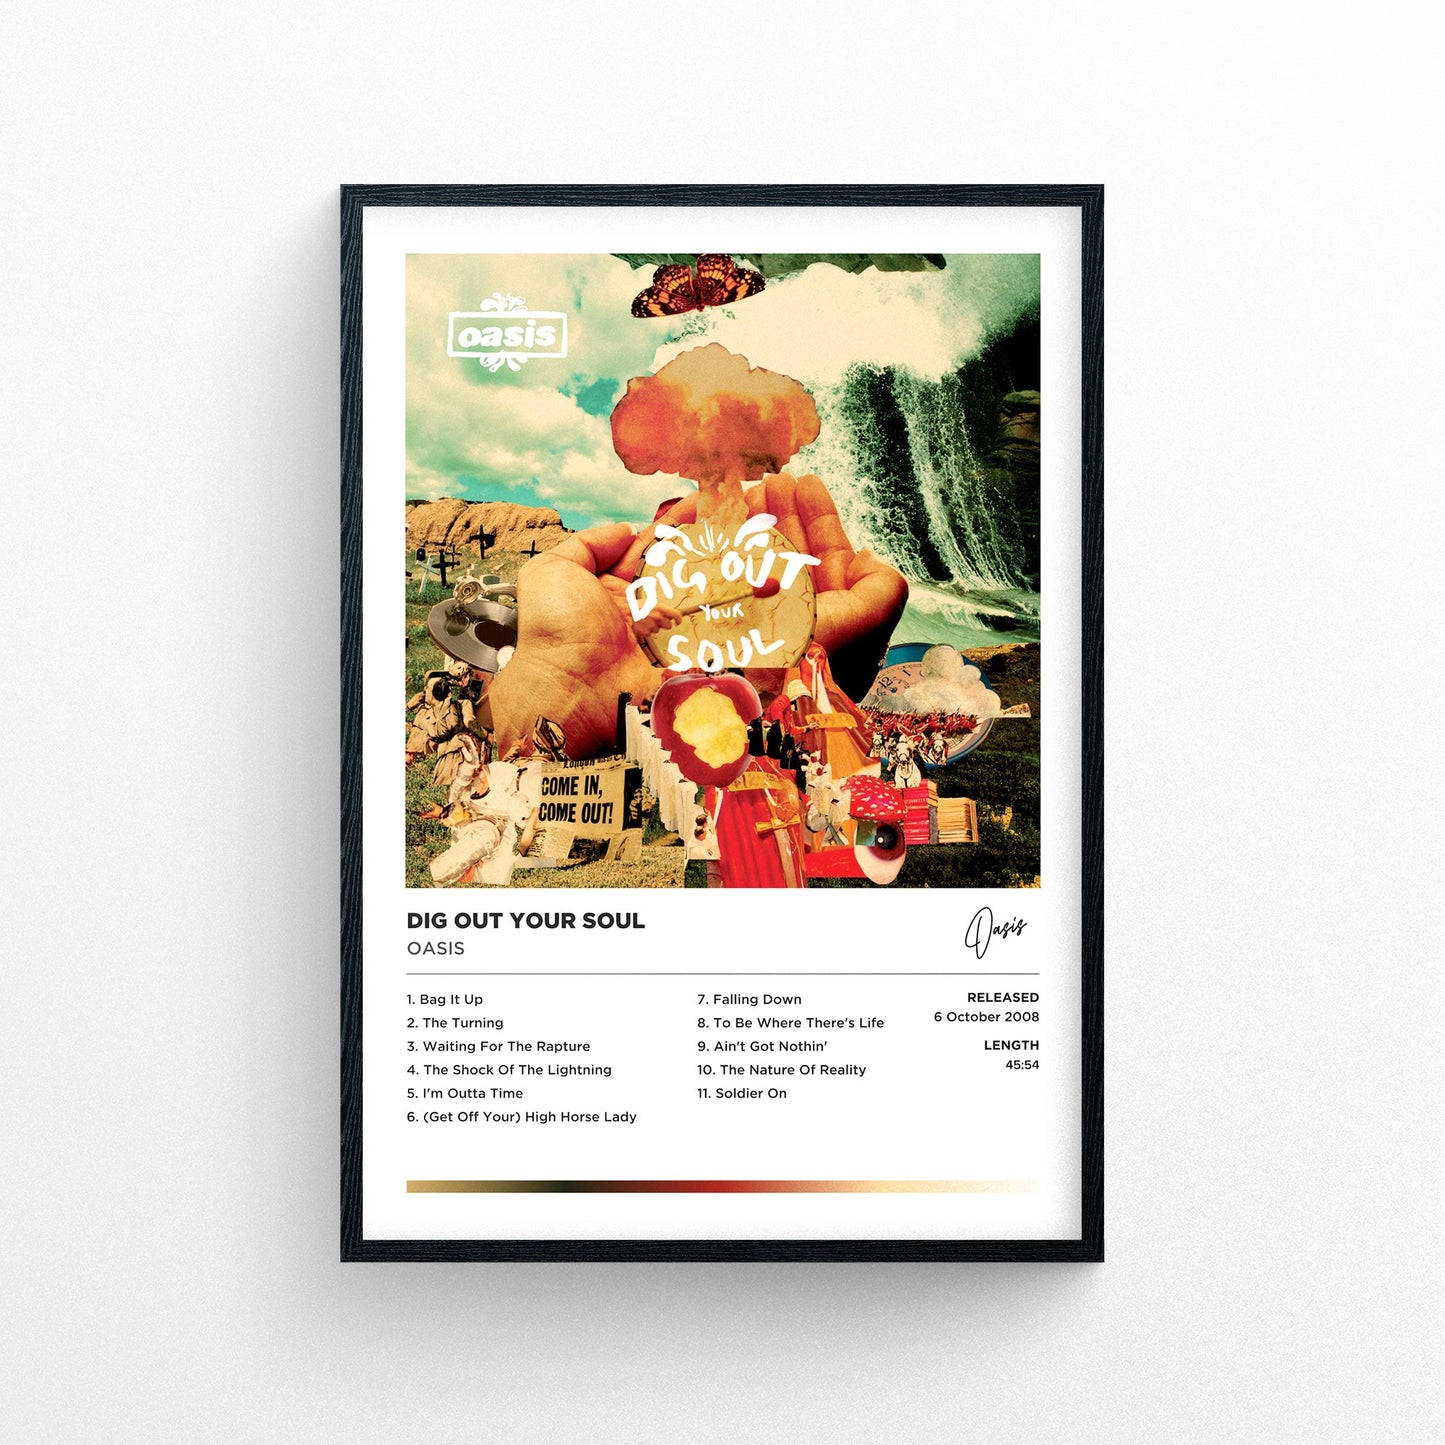 Oasis - Dig Out Your Soul Framed Poster Print | Polaroid Style | Album Cover Artwork